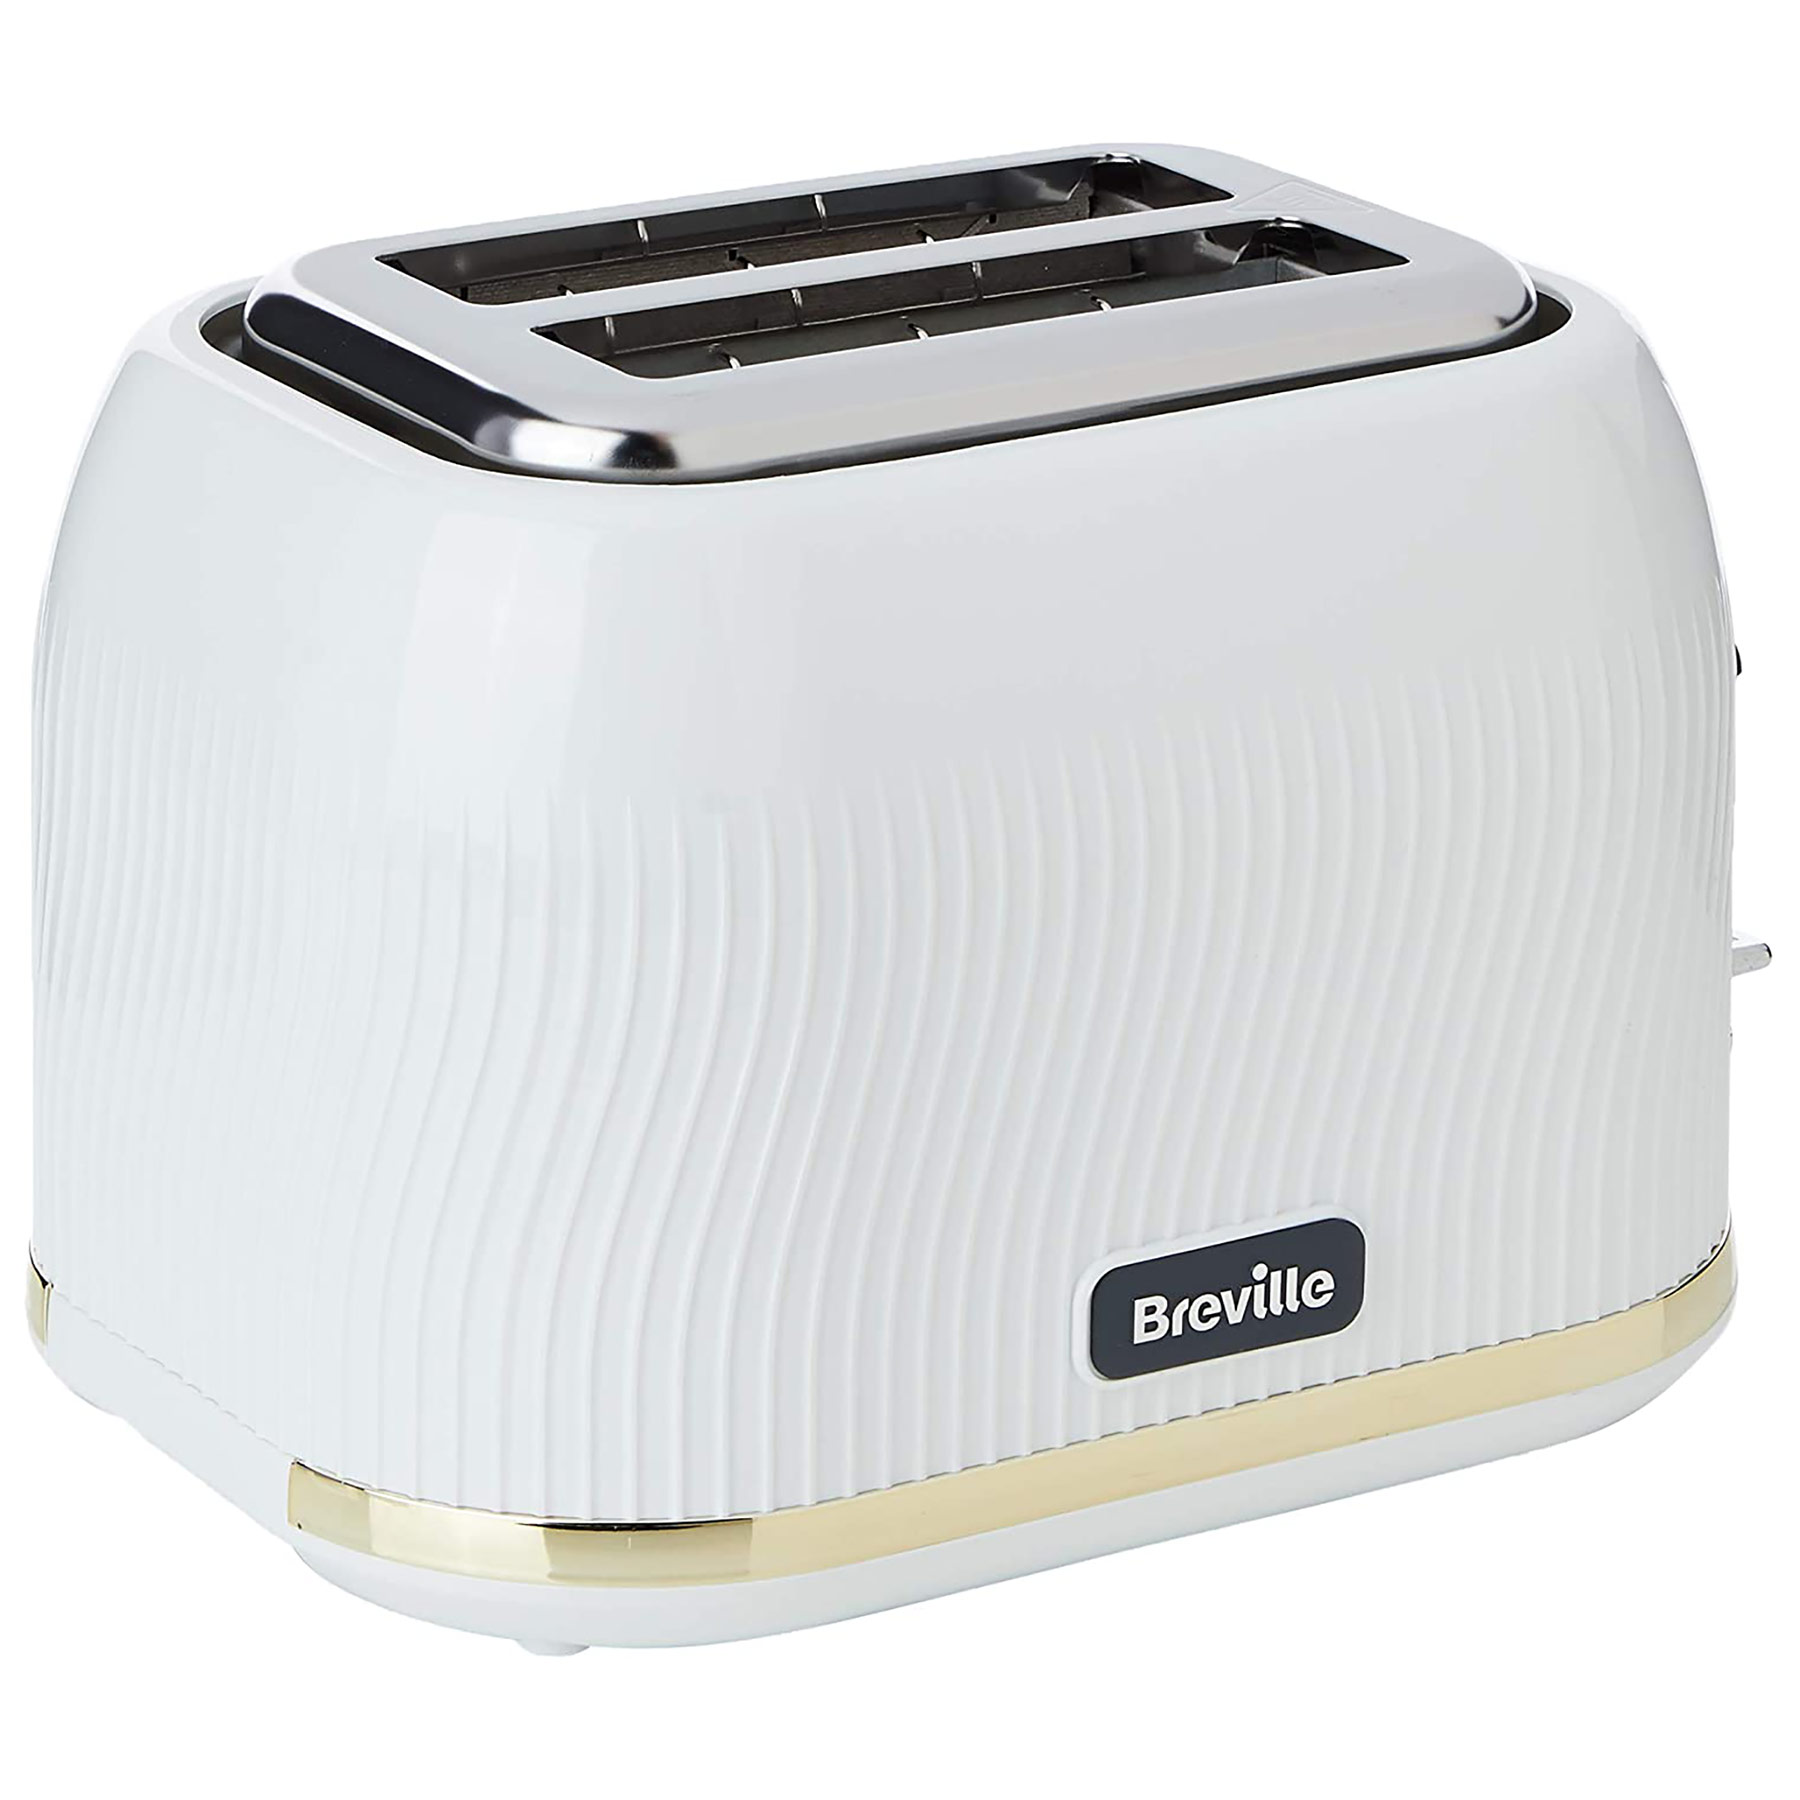 Image of Breville VTT995 2 Slice Flow Toaster in White and Gold